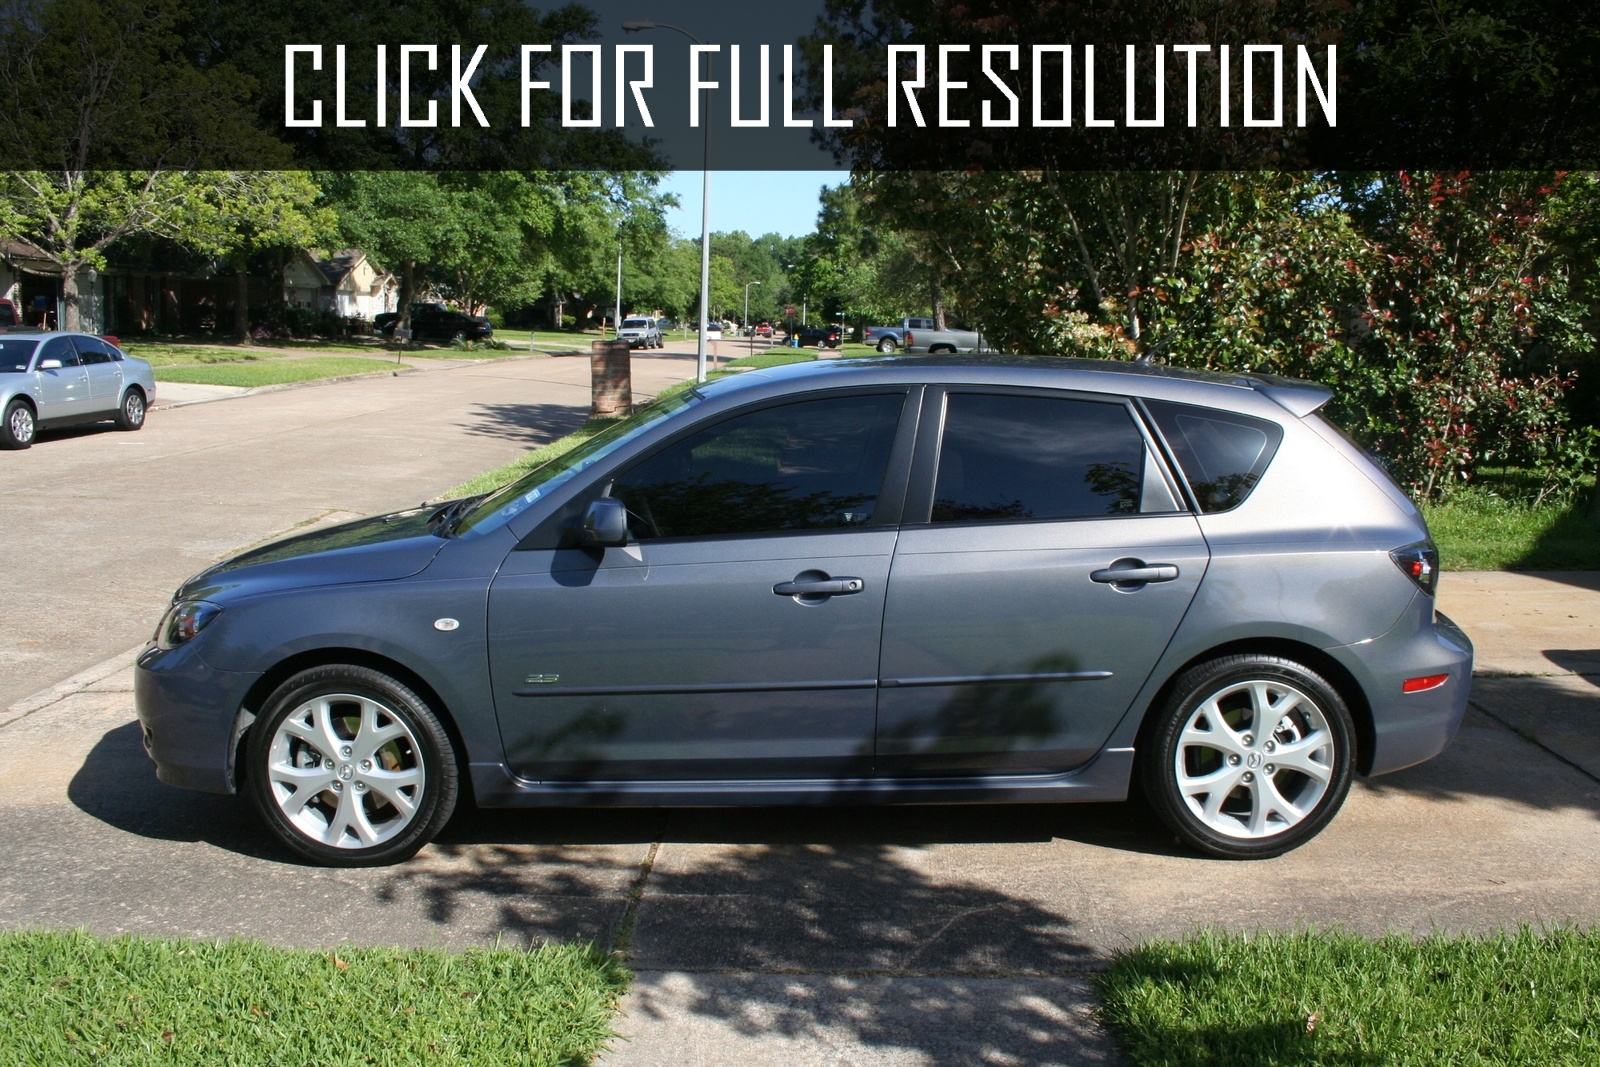 2008 Mazda 3 Hatchback news, reviews, msrp, ratings with